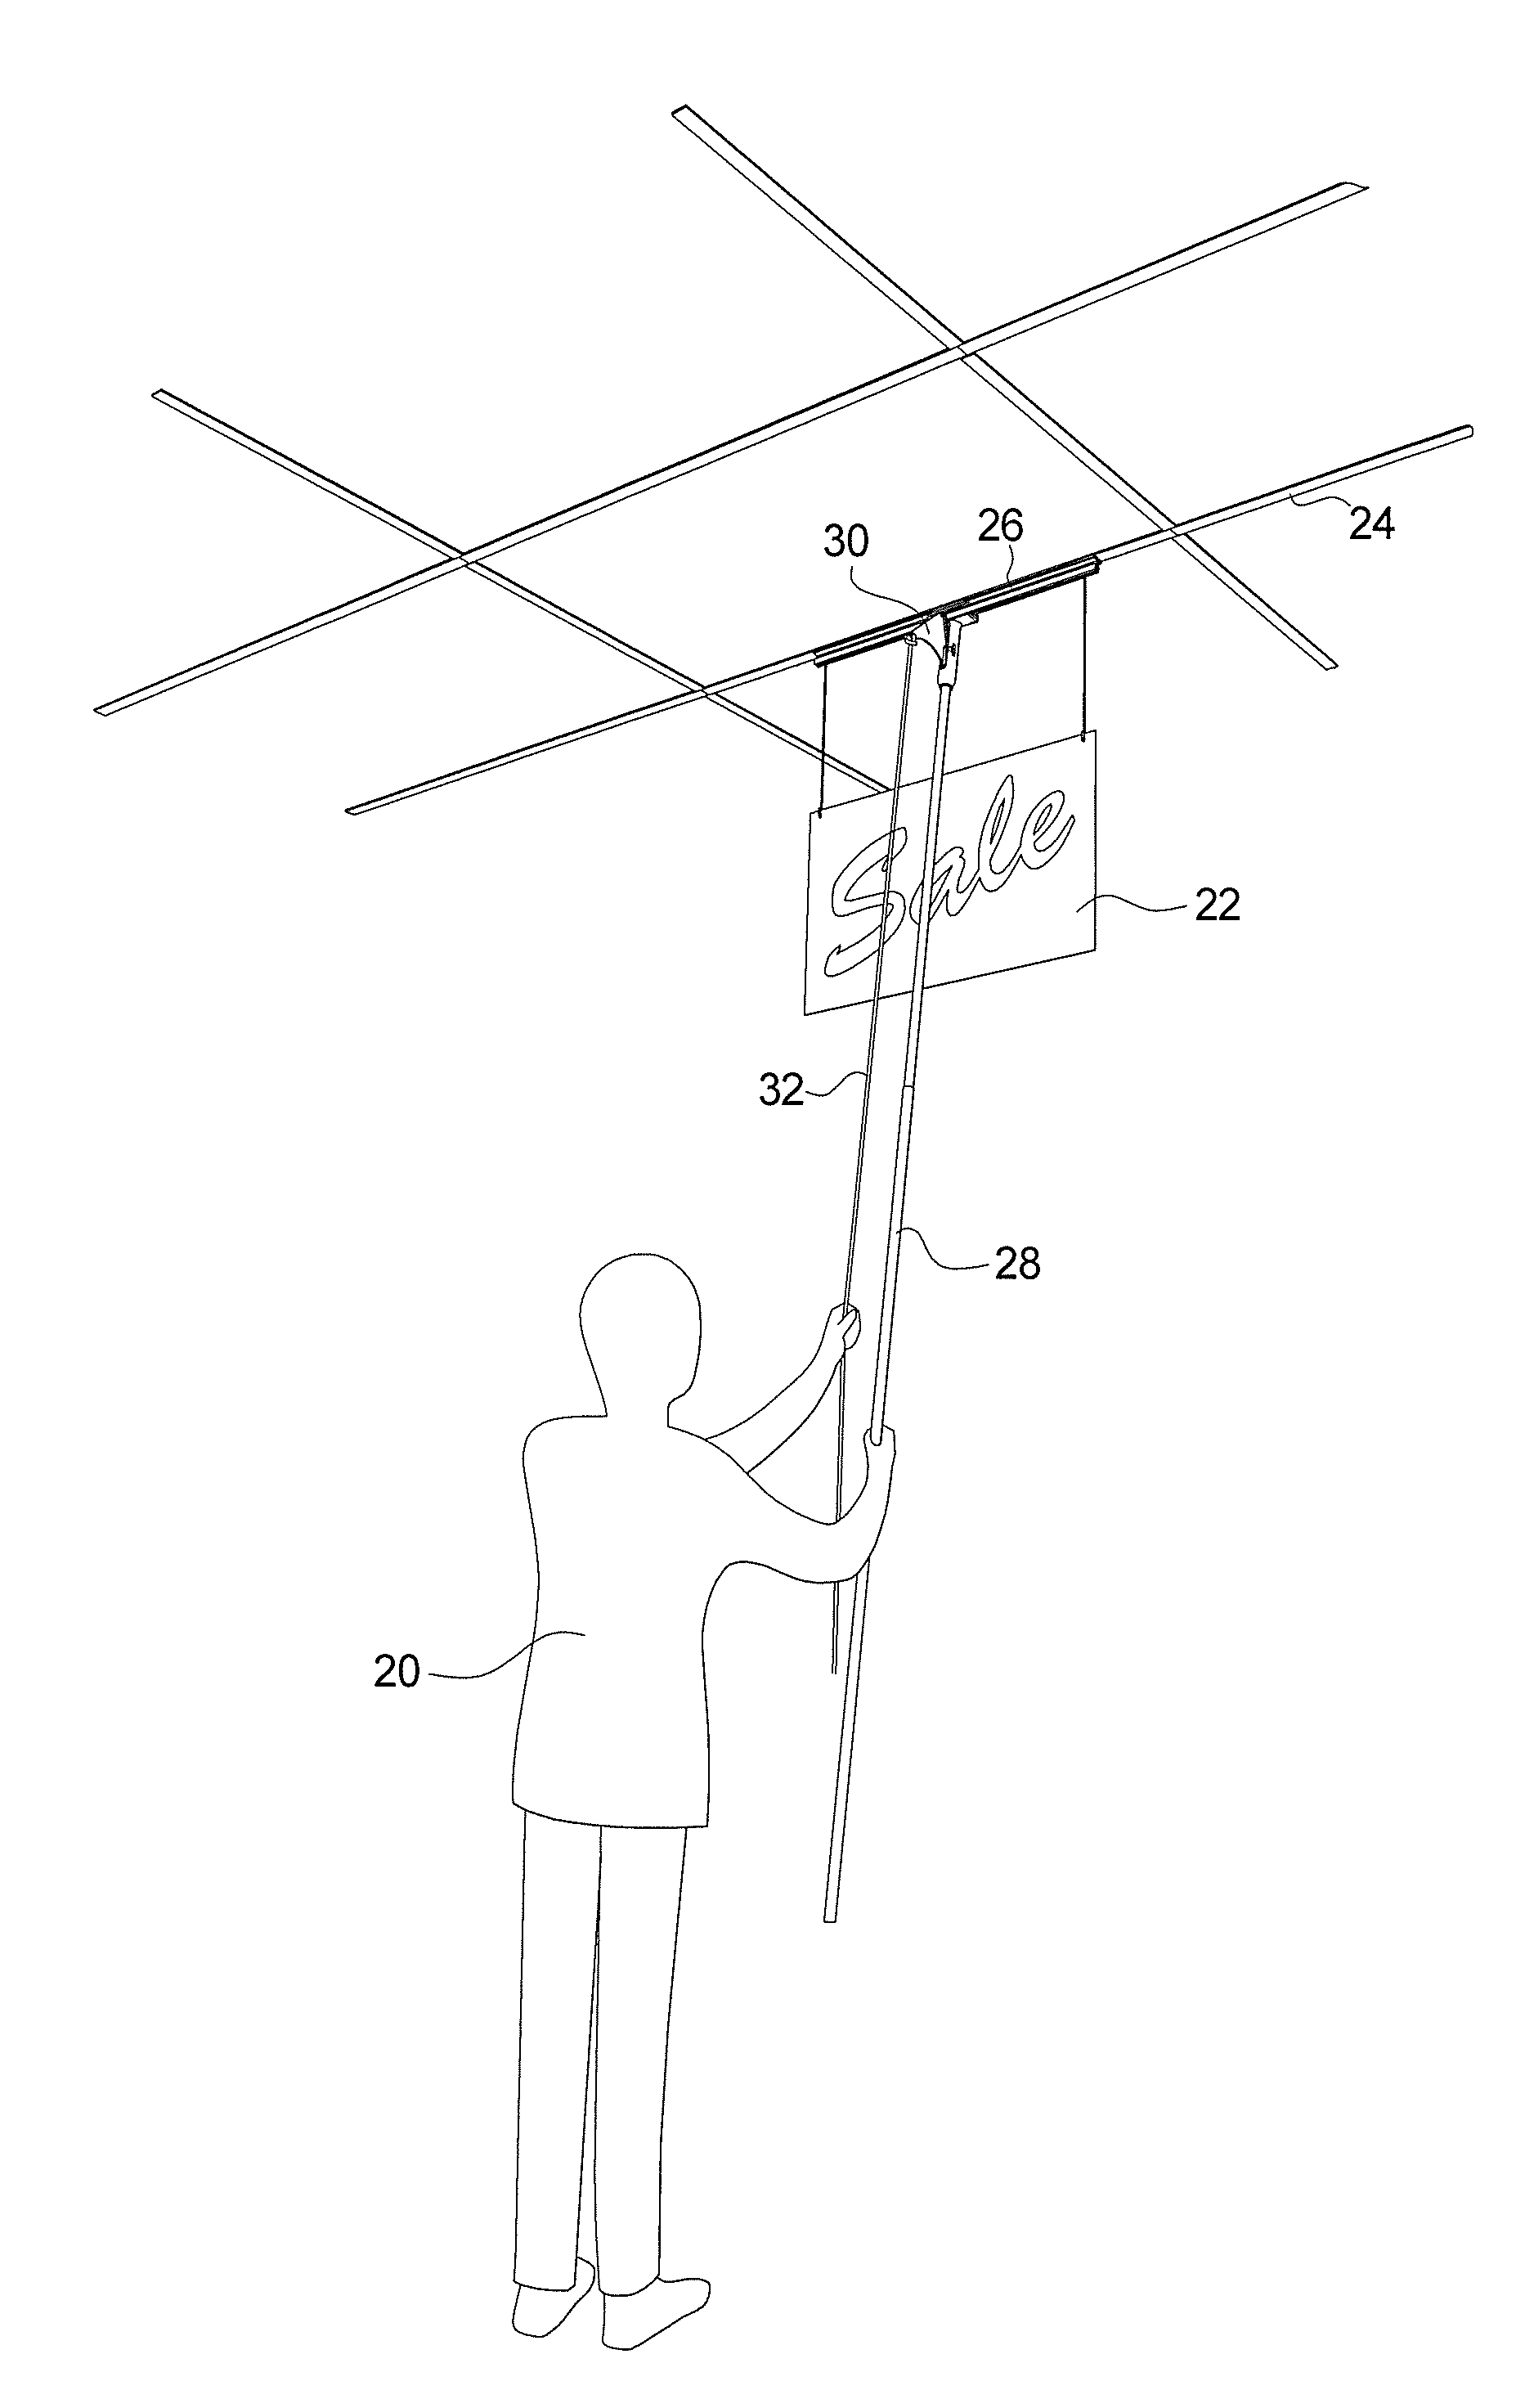 Display mounting system and method